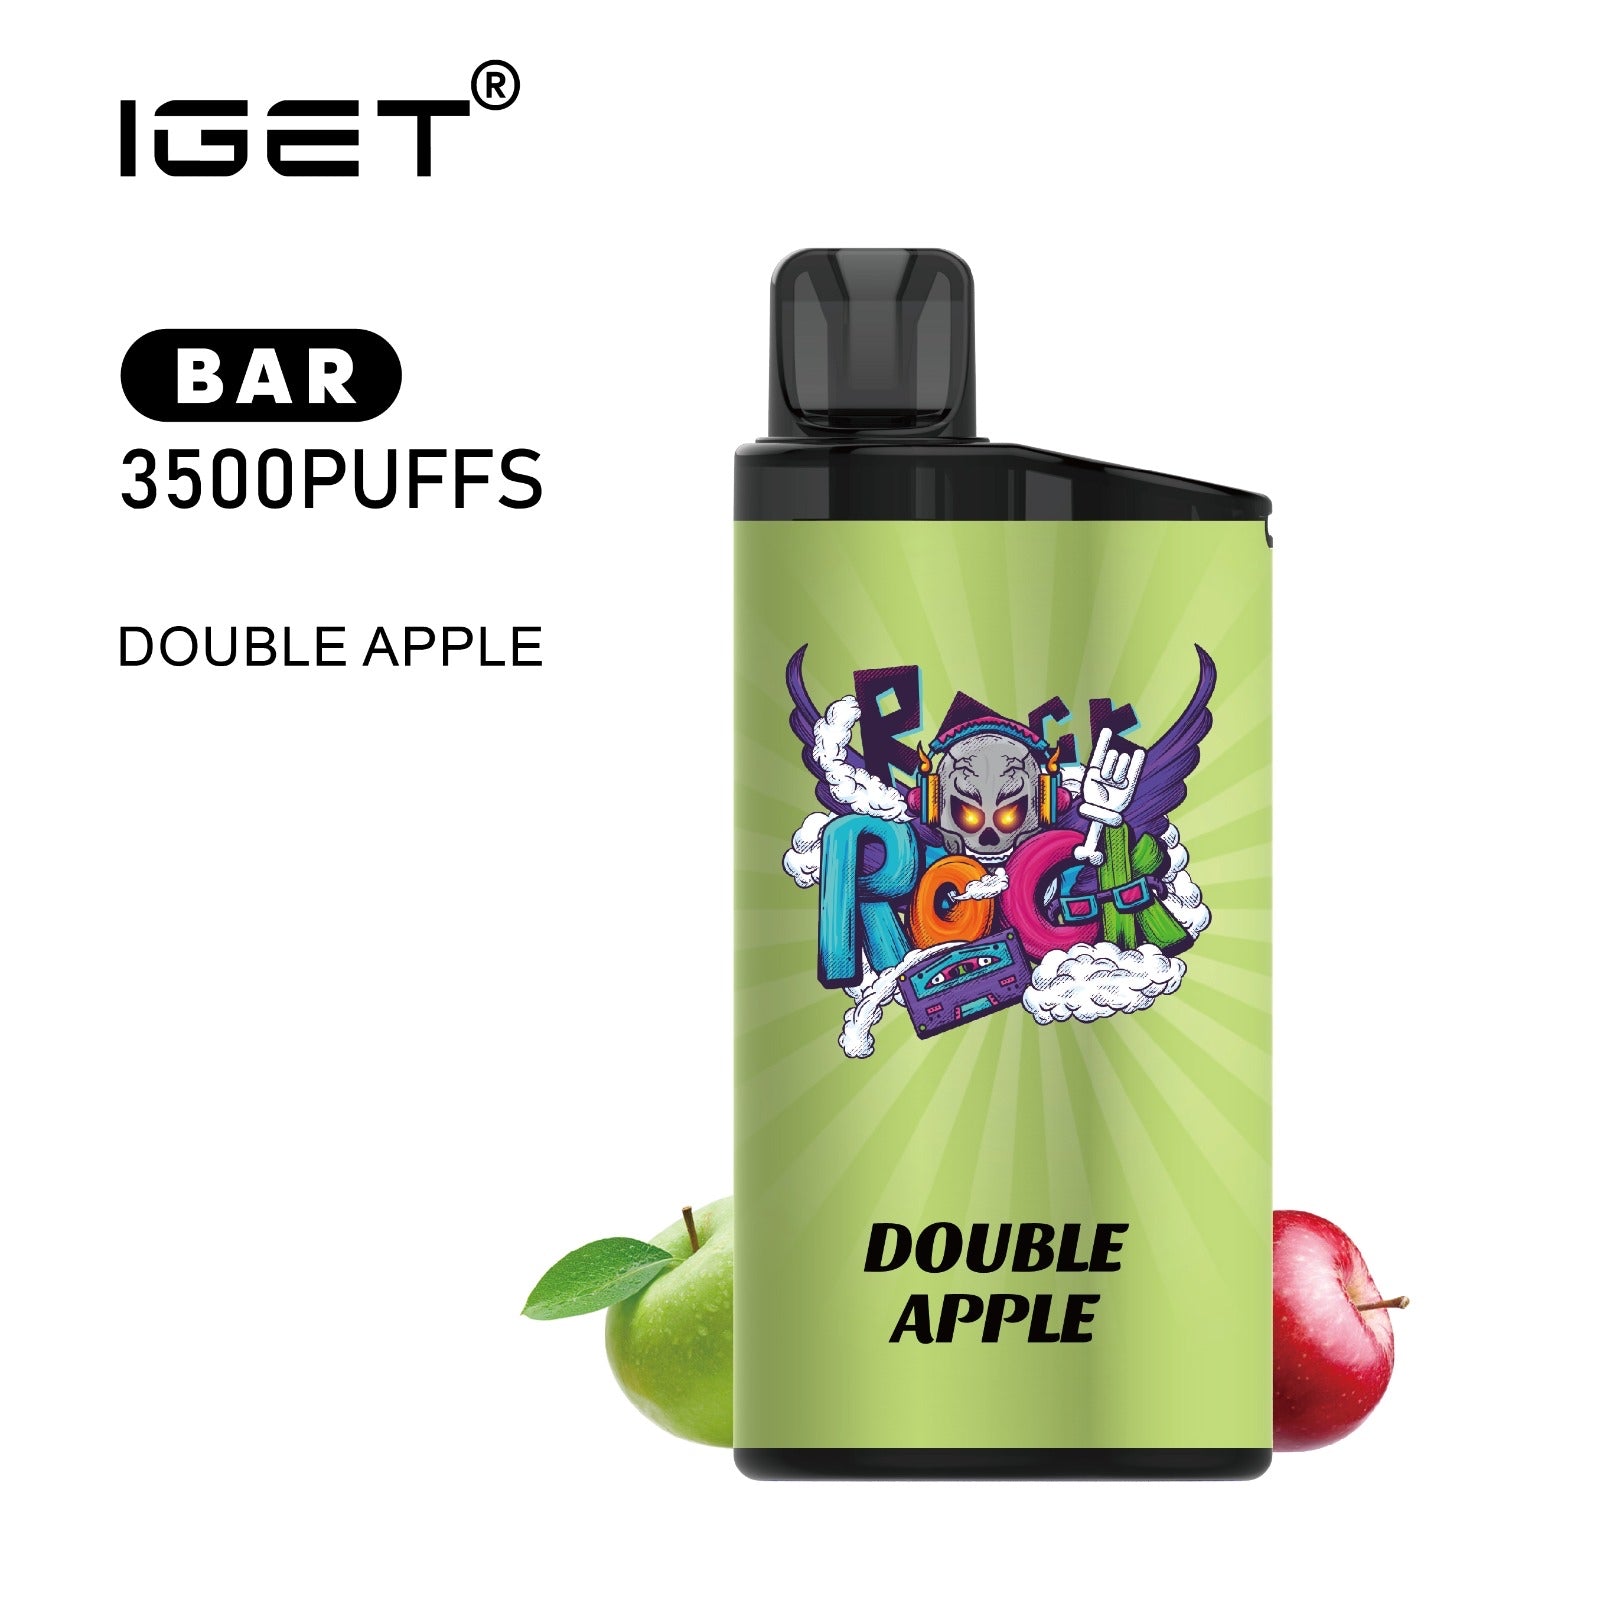 IGET BAR DOUBLE APPLE 3500 PUFFS